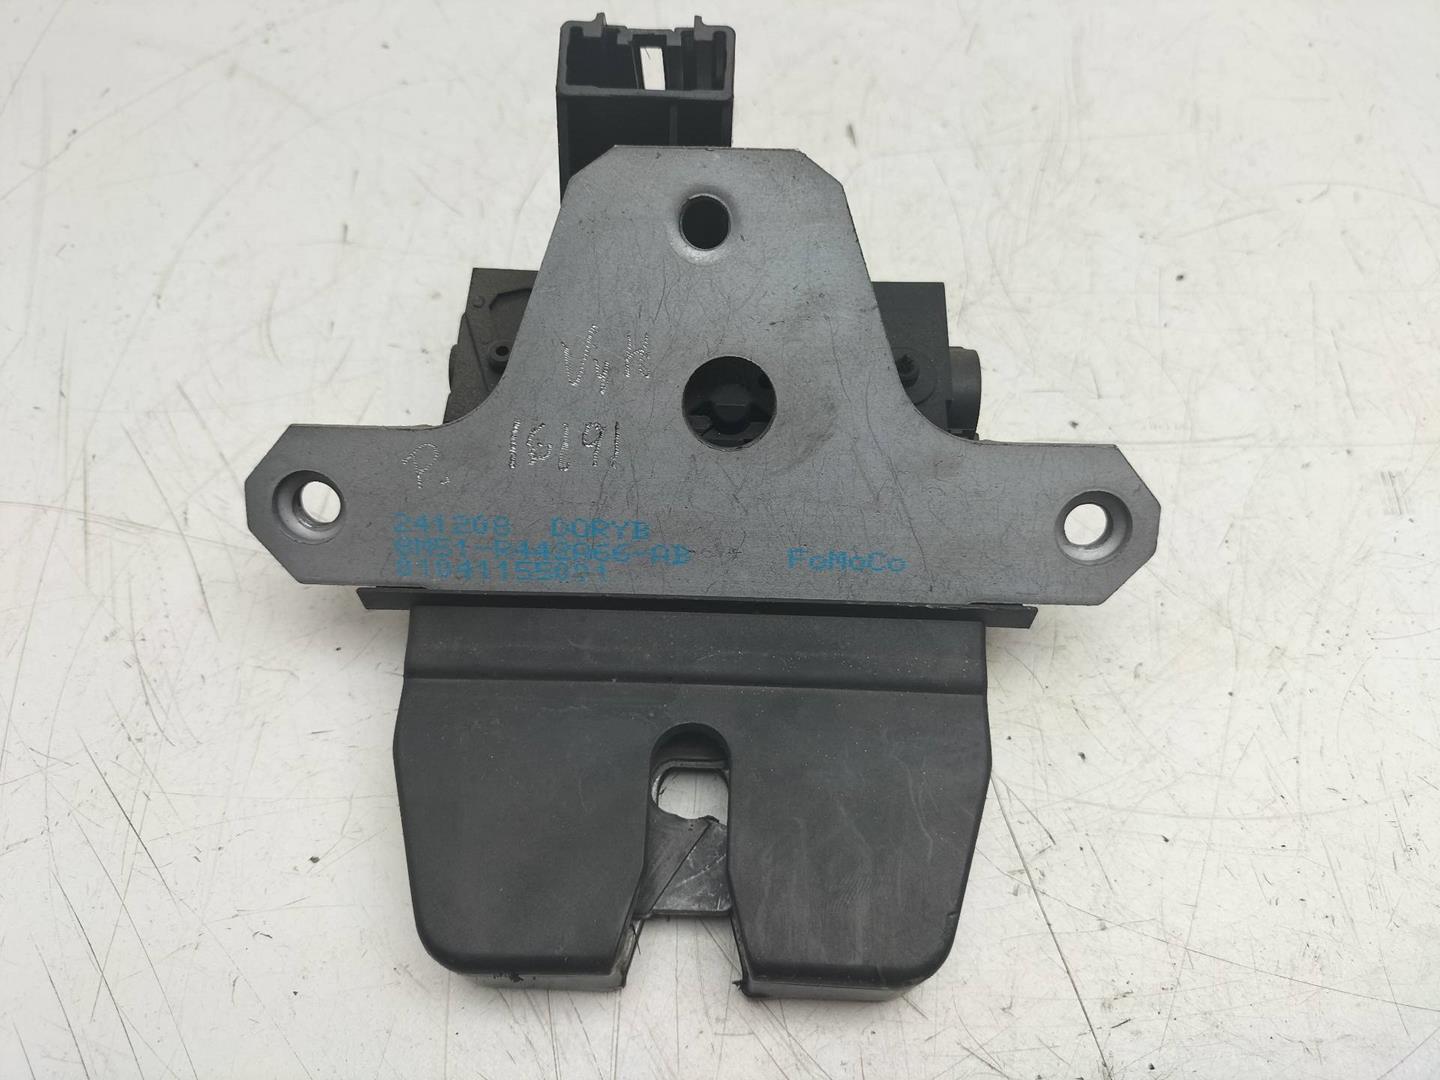 FORD Focus 2 generation (2004-2011) Tailgate Boot Lock 8M51R442A66AB, CONCIERRE, 4PINES 19226262